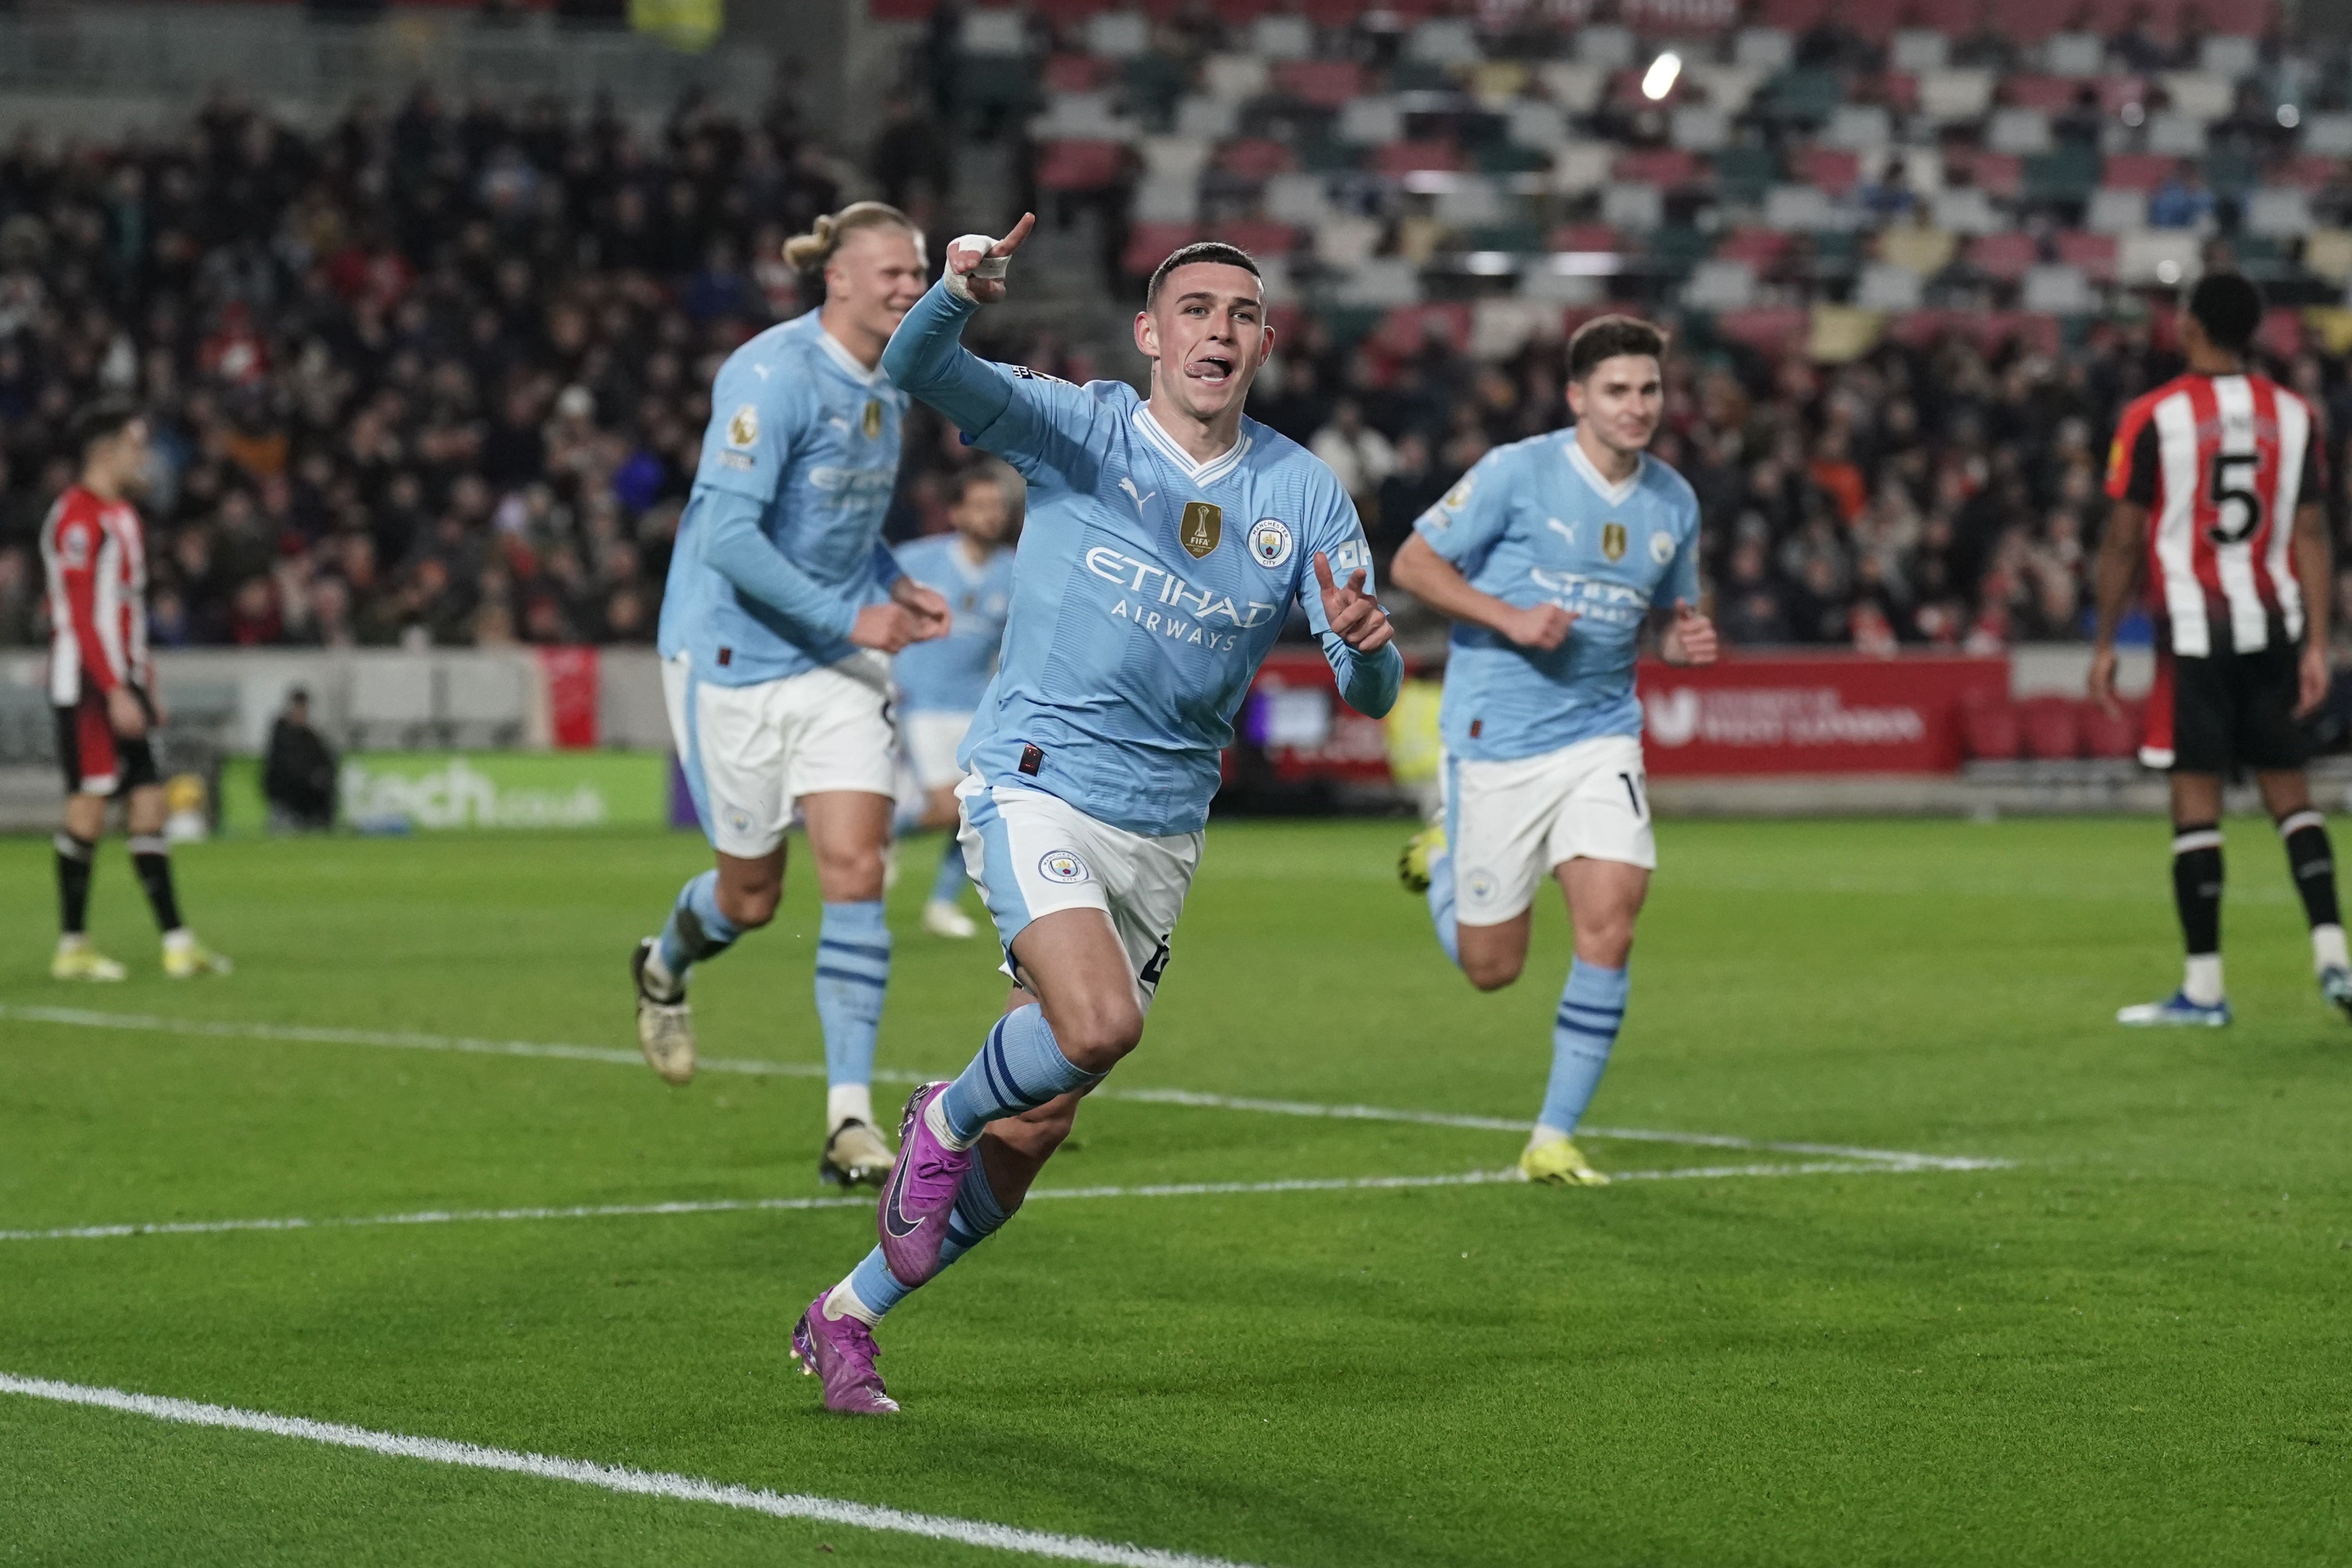 Manchester City’s Phil Foden scored a hat-trick against Brentford earlier this month (Adam Davy/PA)